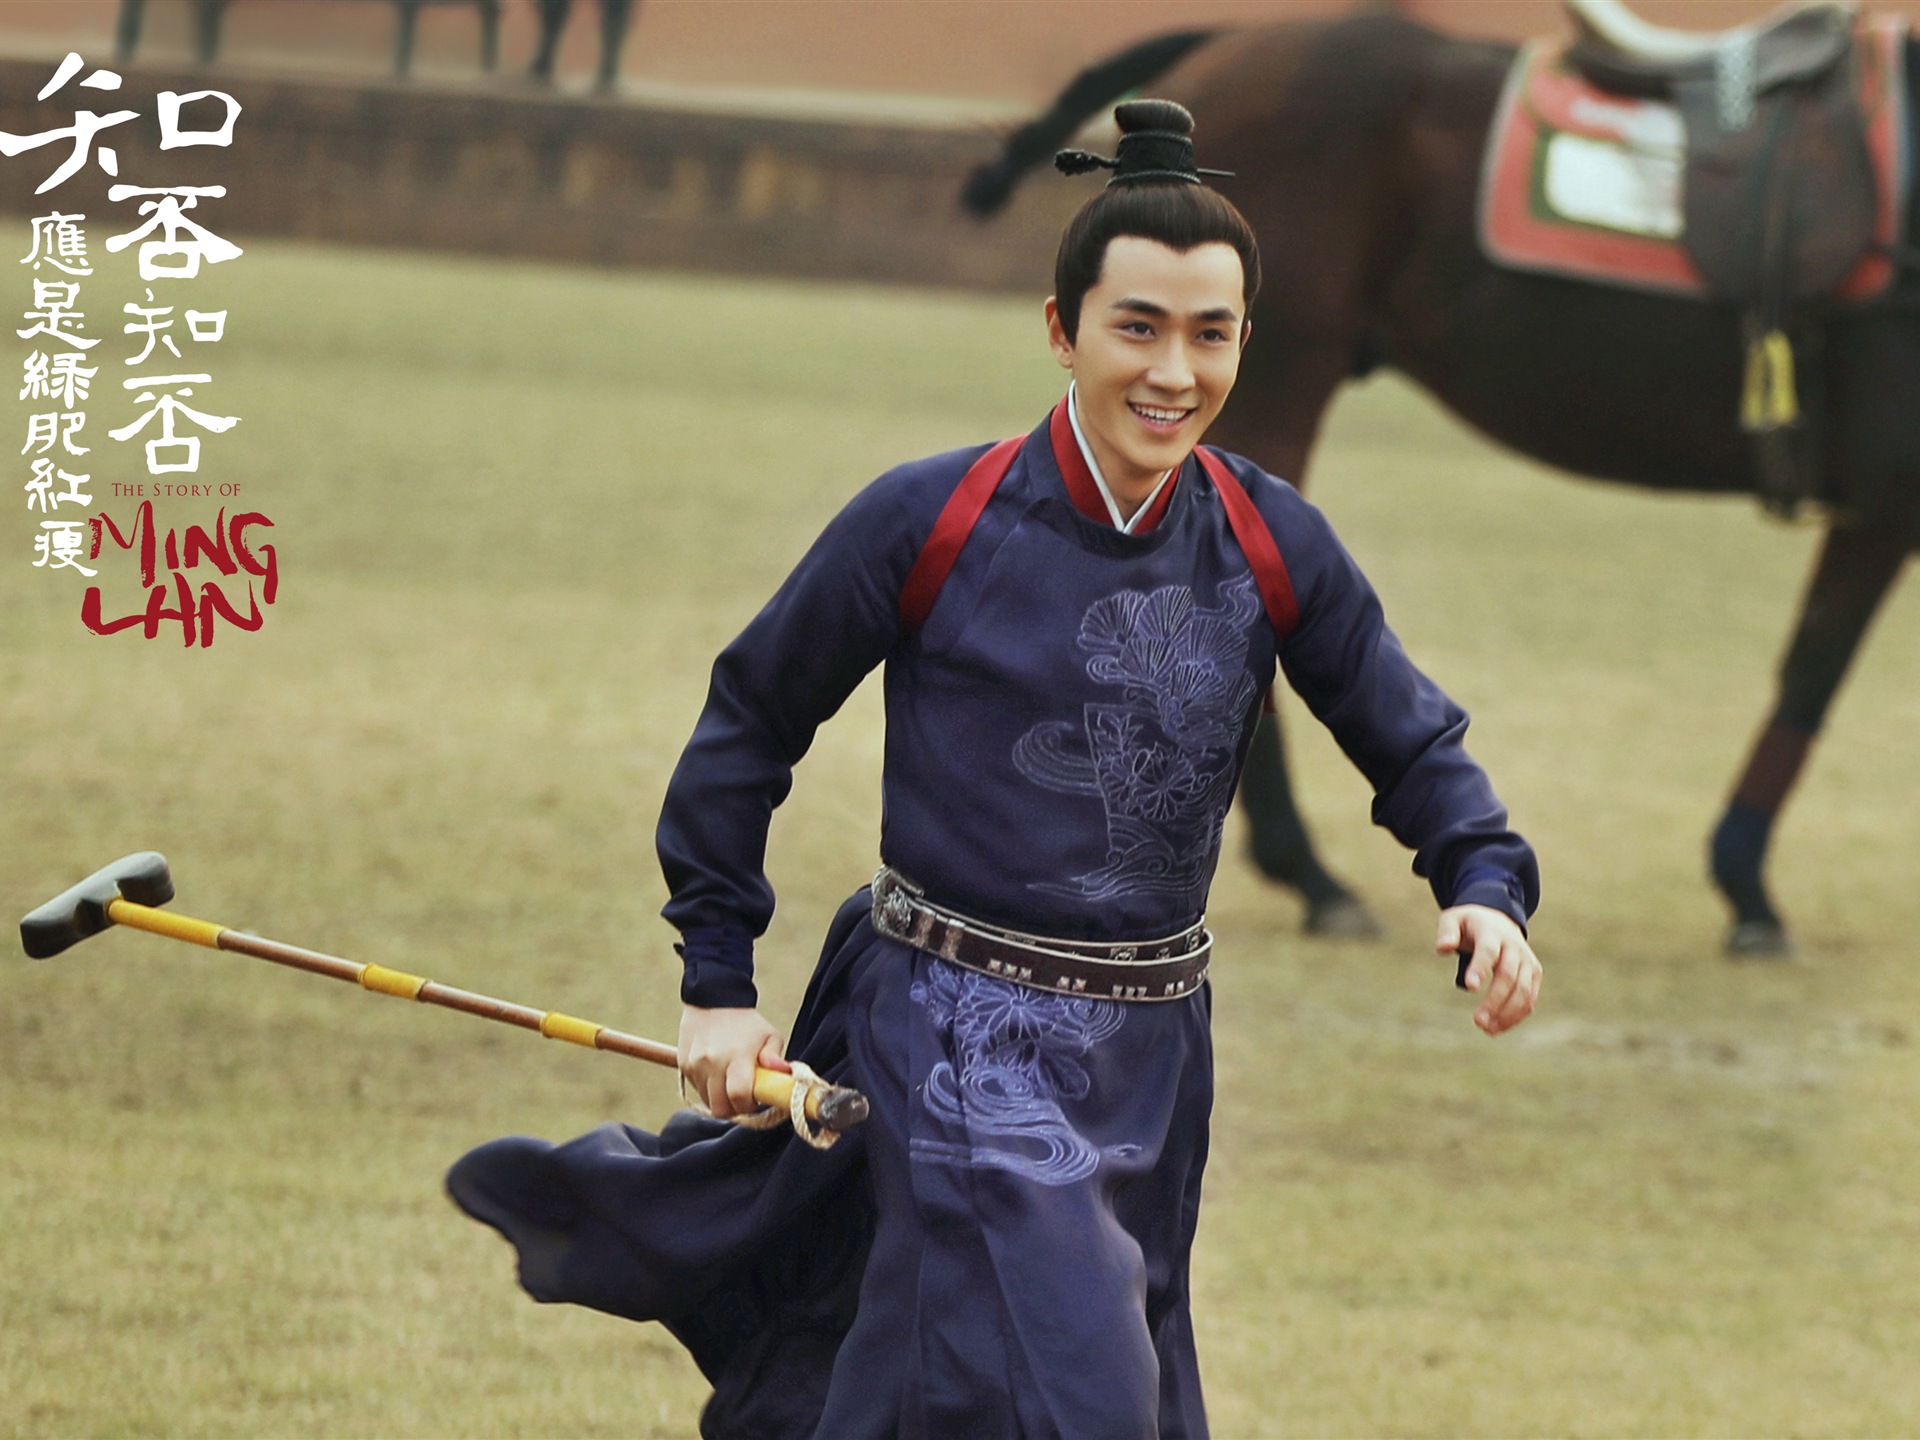 The Story Of MingLan, TV series HD wallpapers #25 - 1920x1440